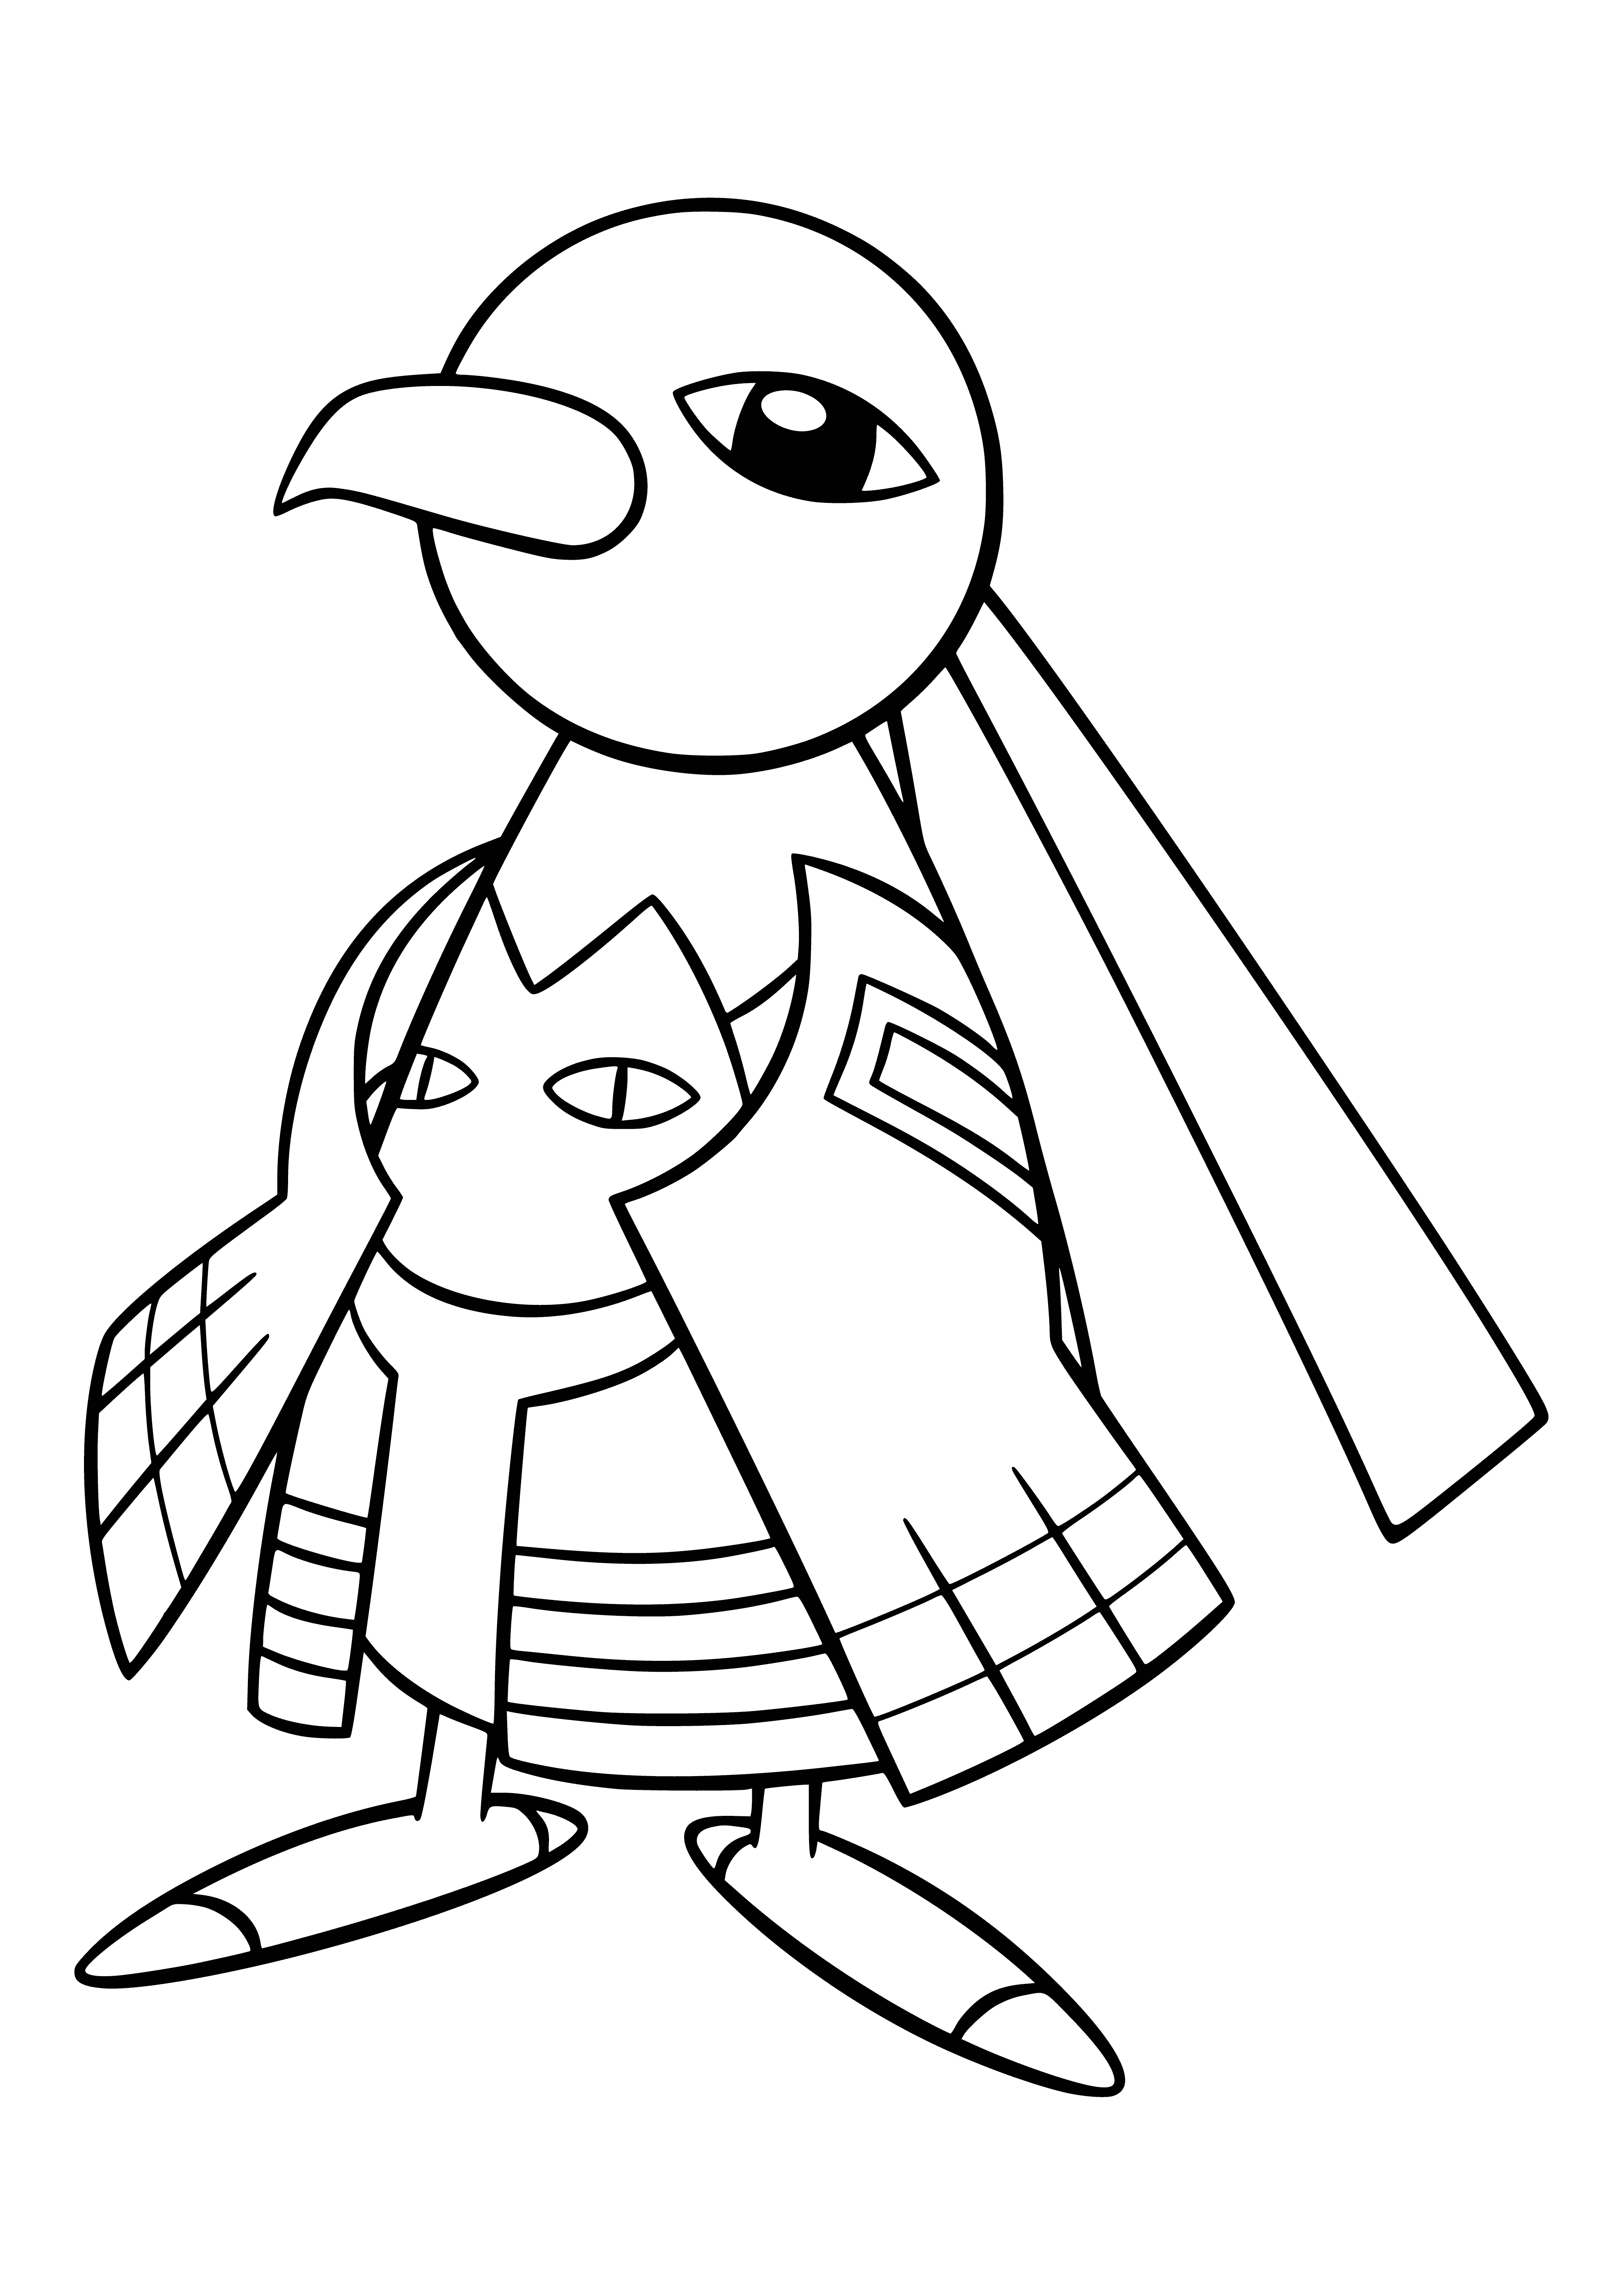 coloring page: Ksatu is a flying Pokemon with black body, white head/tail, red crest/eyes, two black wings w/ white spots and black beak/feet.